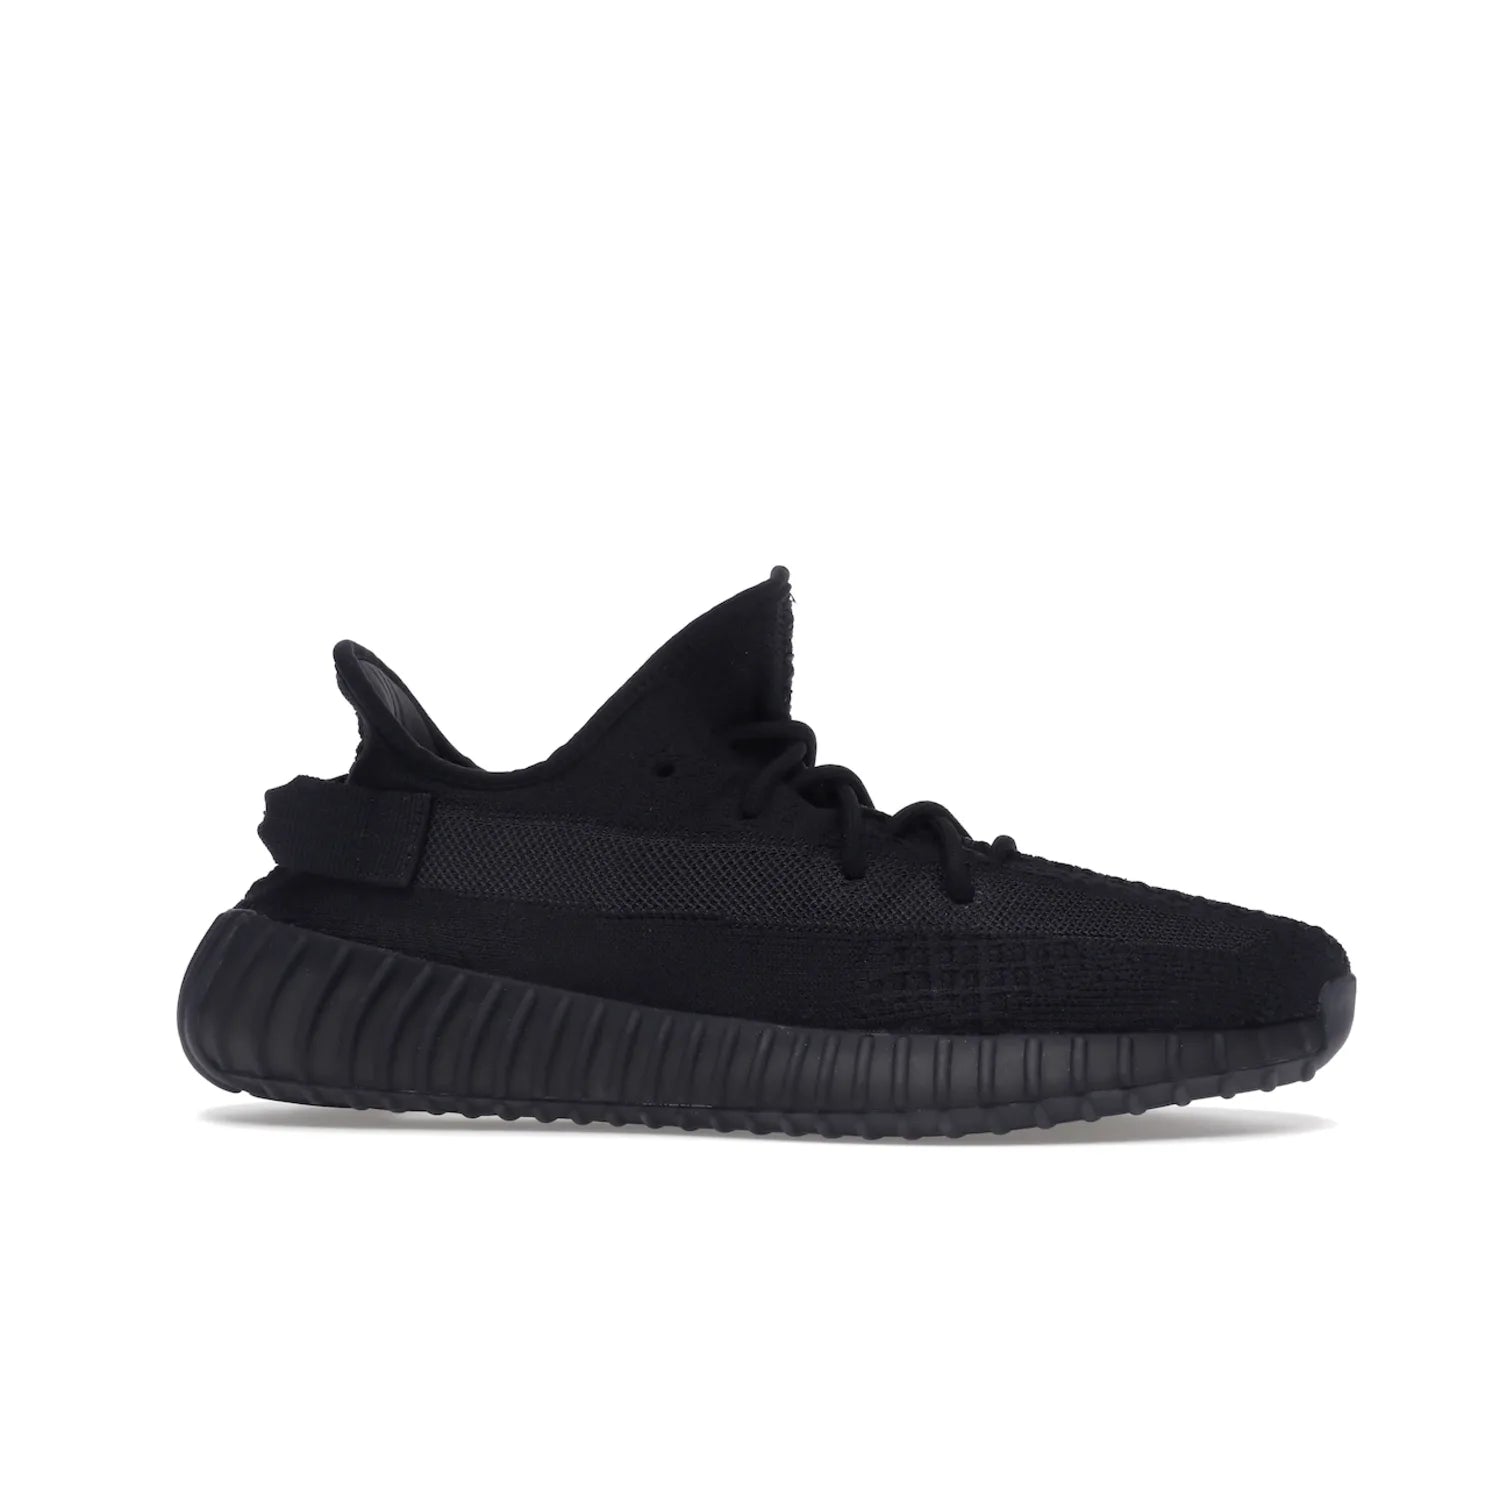 adidas Yeezy Boost 350 V2 Onyx - Image 2 - Only at www.BallersClubKickz.com - Adidas Yeezy Boost 350 V2 Onyx Triple Black shoes for comfort and style. Arriving Spring 2022.